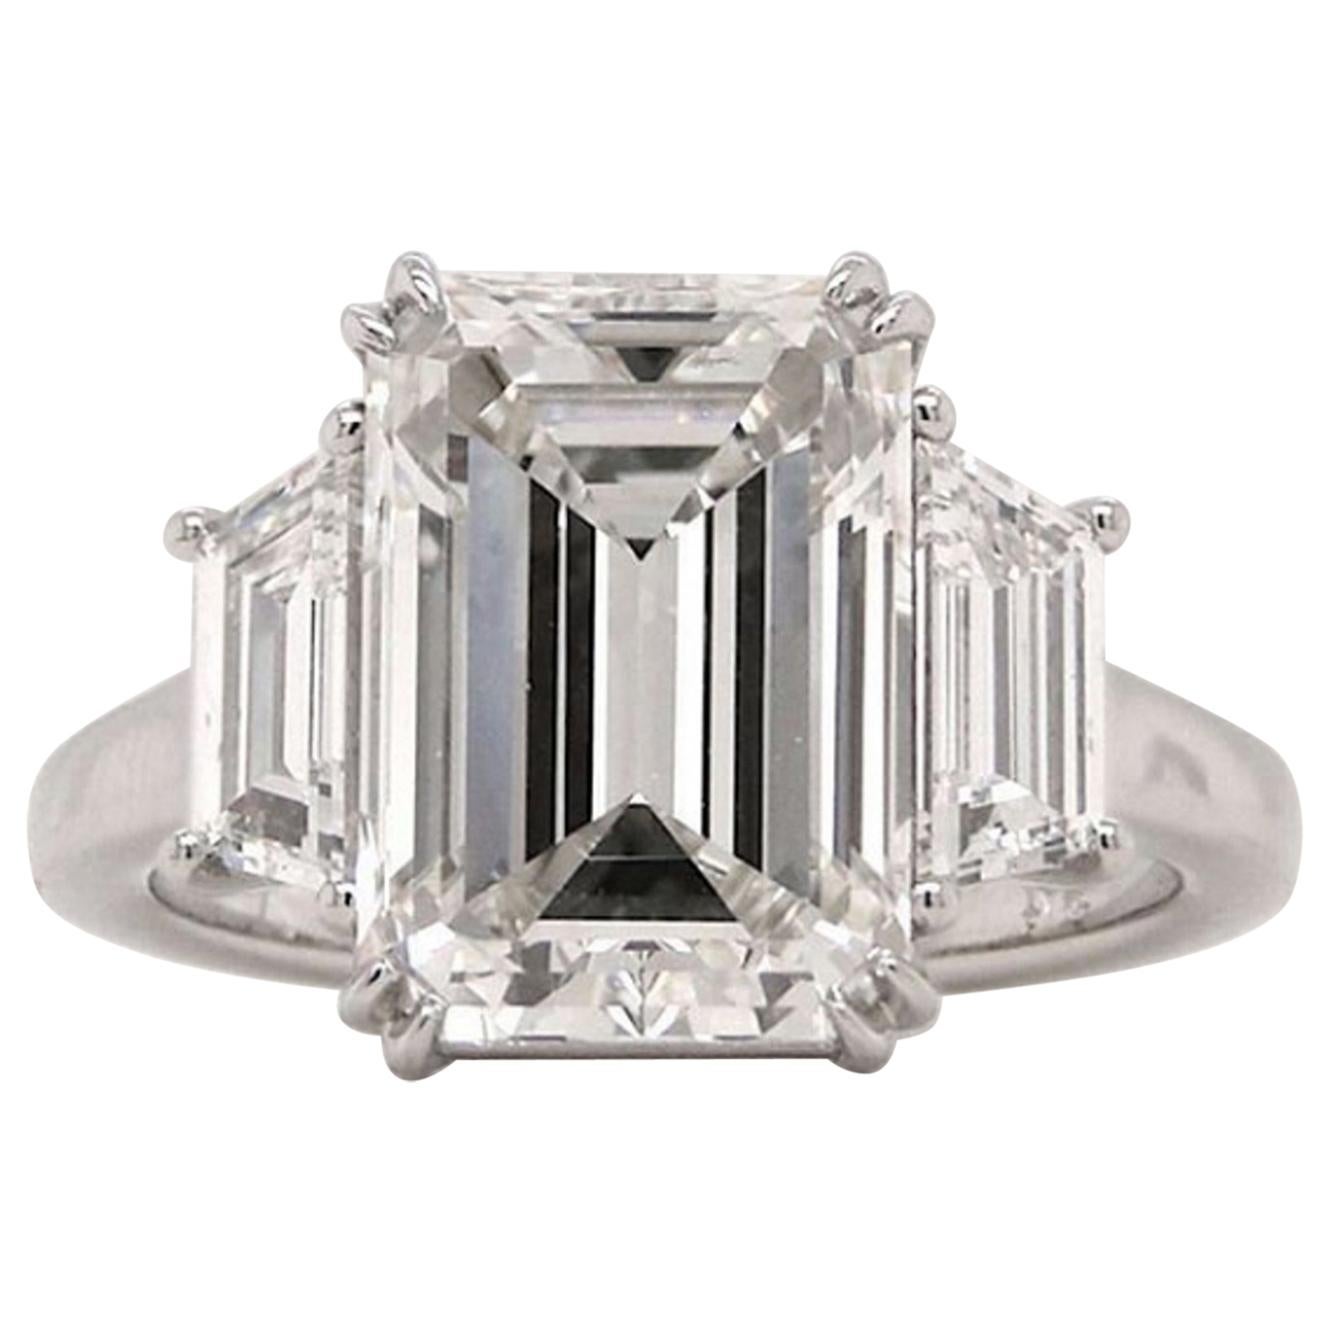 GIA Certified 4.01 Carat Flawless Excellent Cut Emerald Cut Diamond Ring For Sale